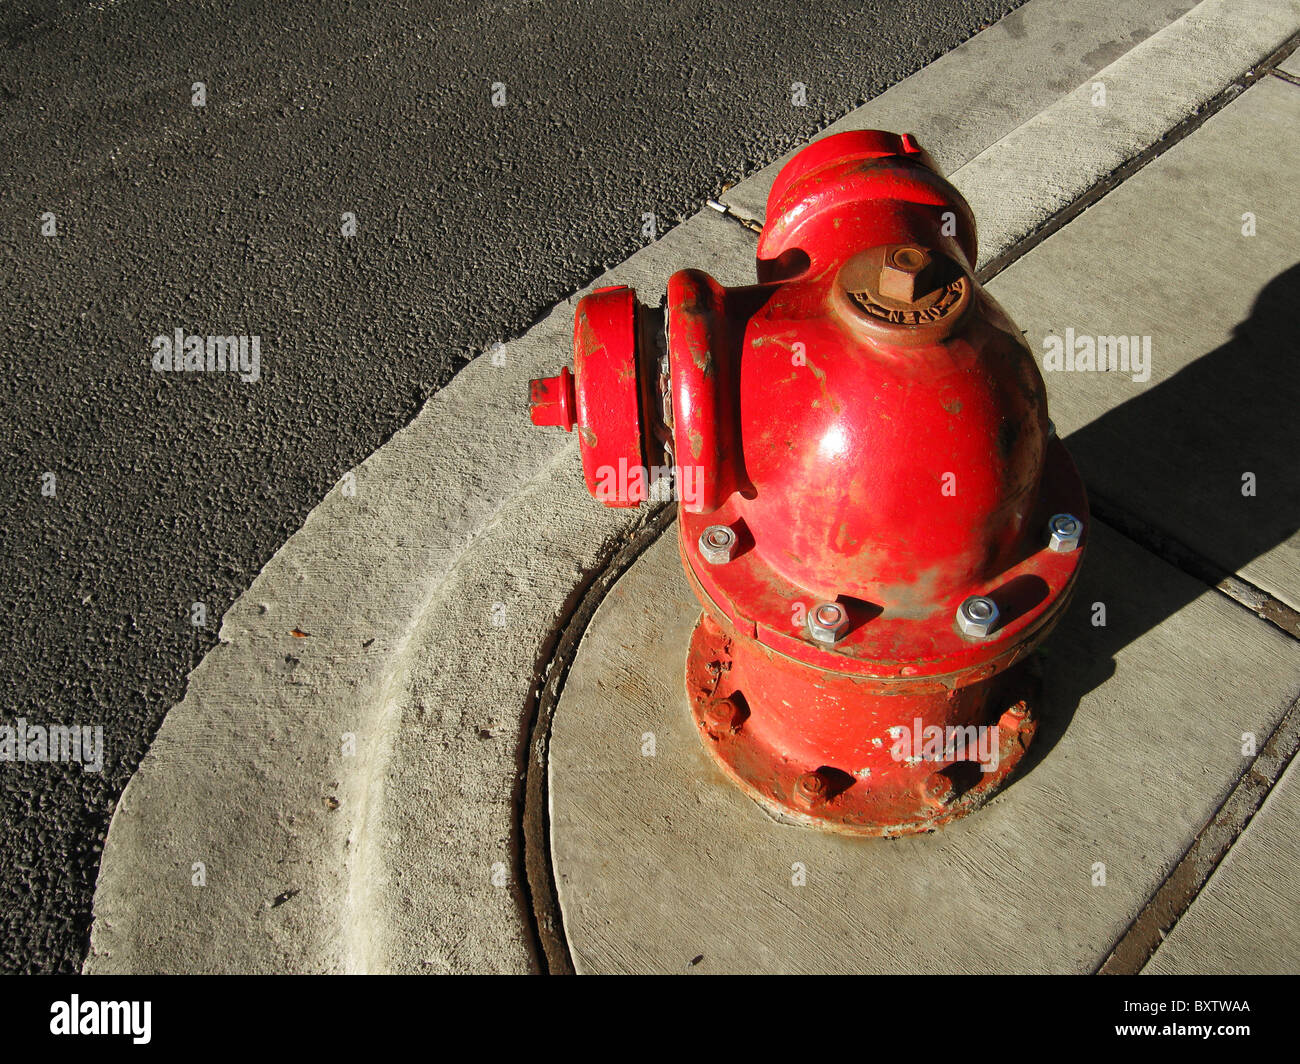 Old style round red fire hydrant on the corner of a street in the city. Stock Photo